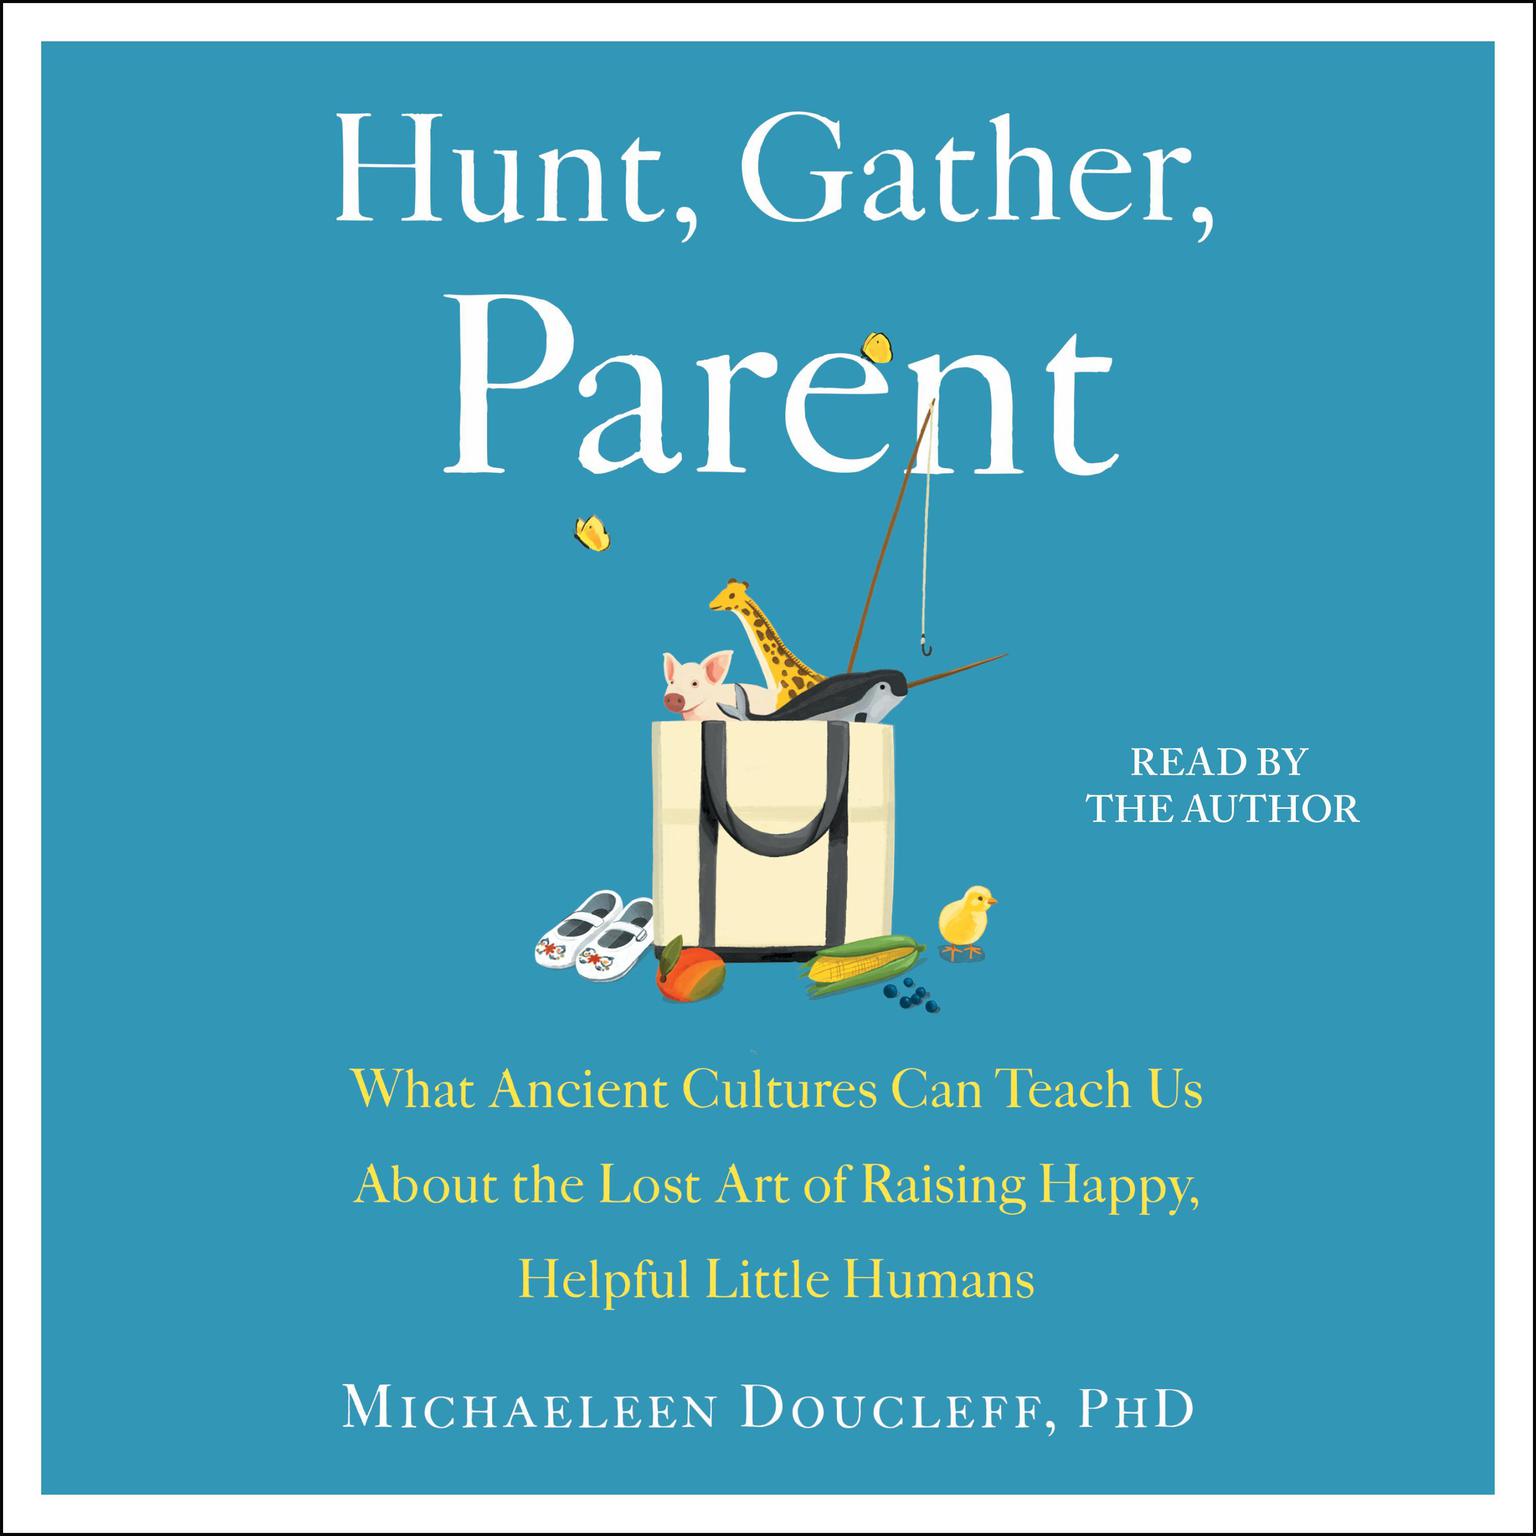 Hunt, Gather, Parent: What Ancient Cultures Can Teach Us About the Lost Art of Raising Happy, Helpful Little Humans Audiobook, by Michaeleen Doucleff